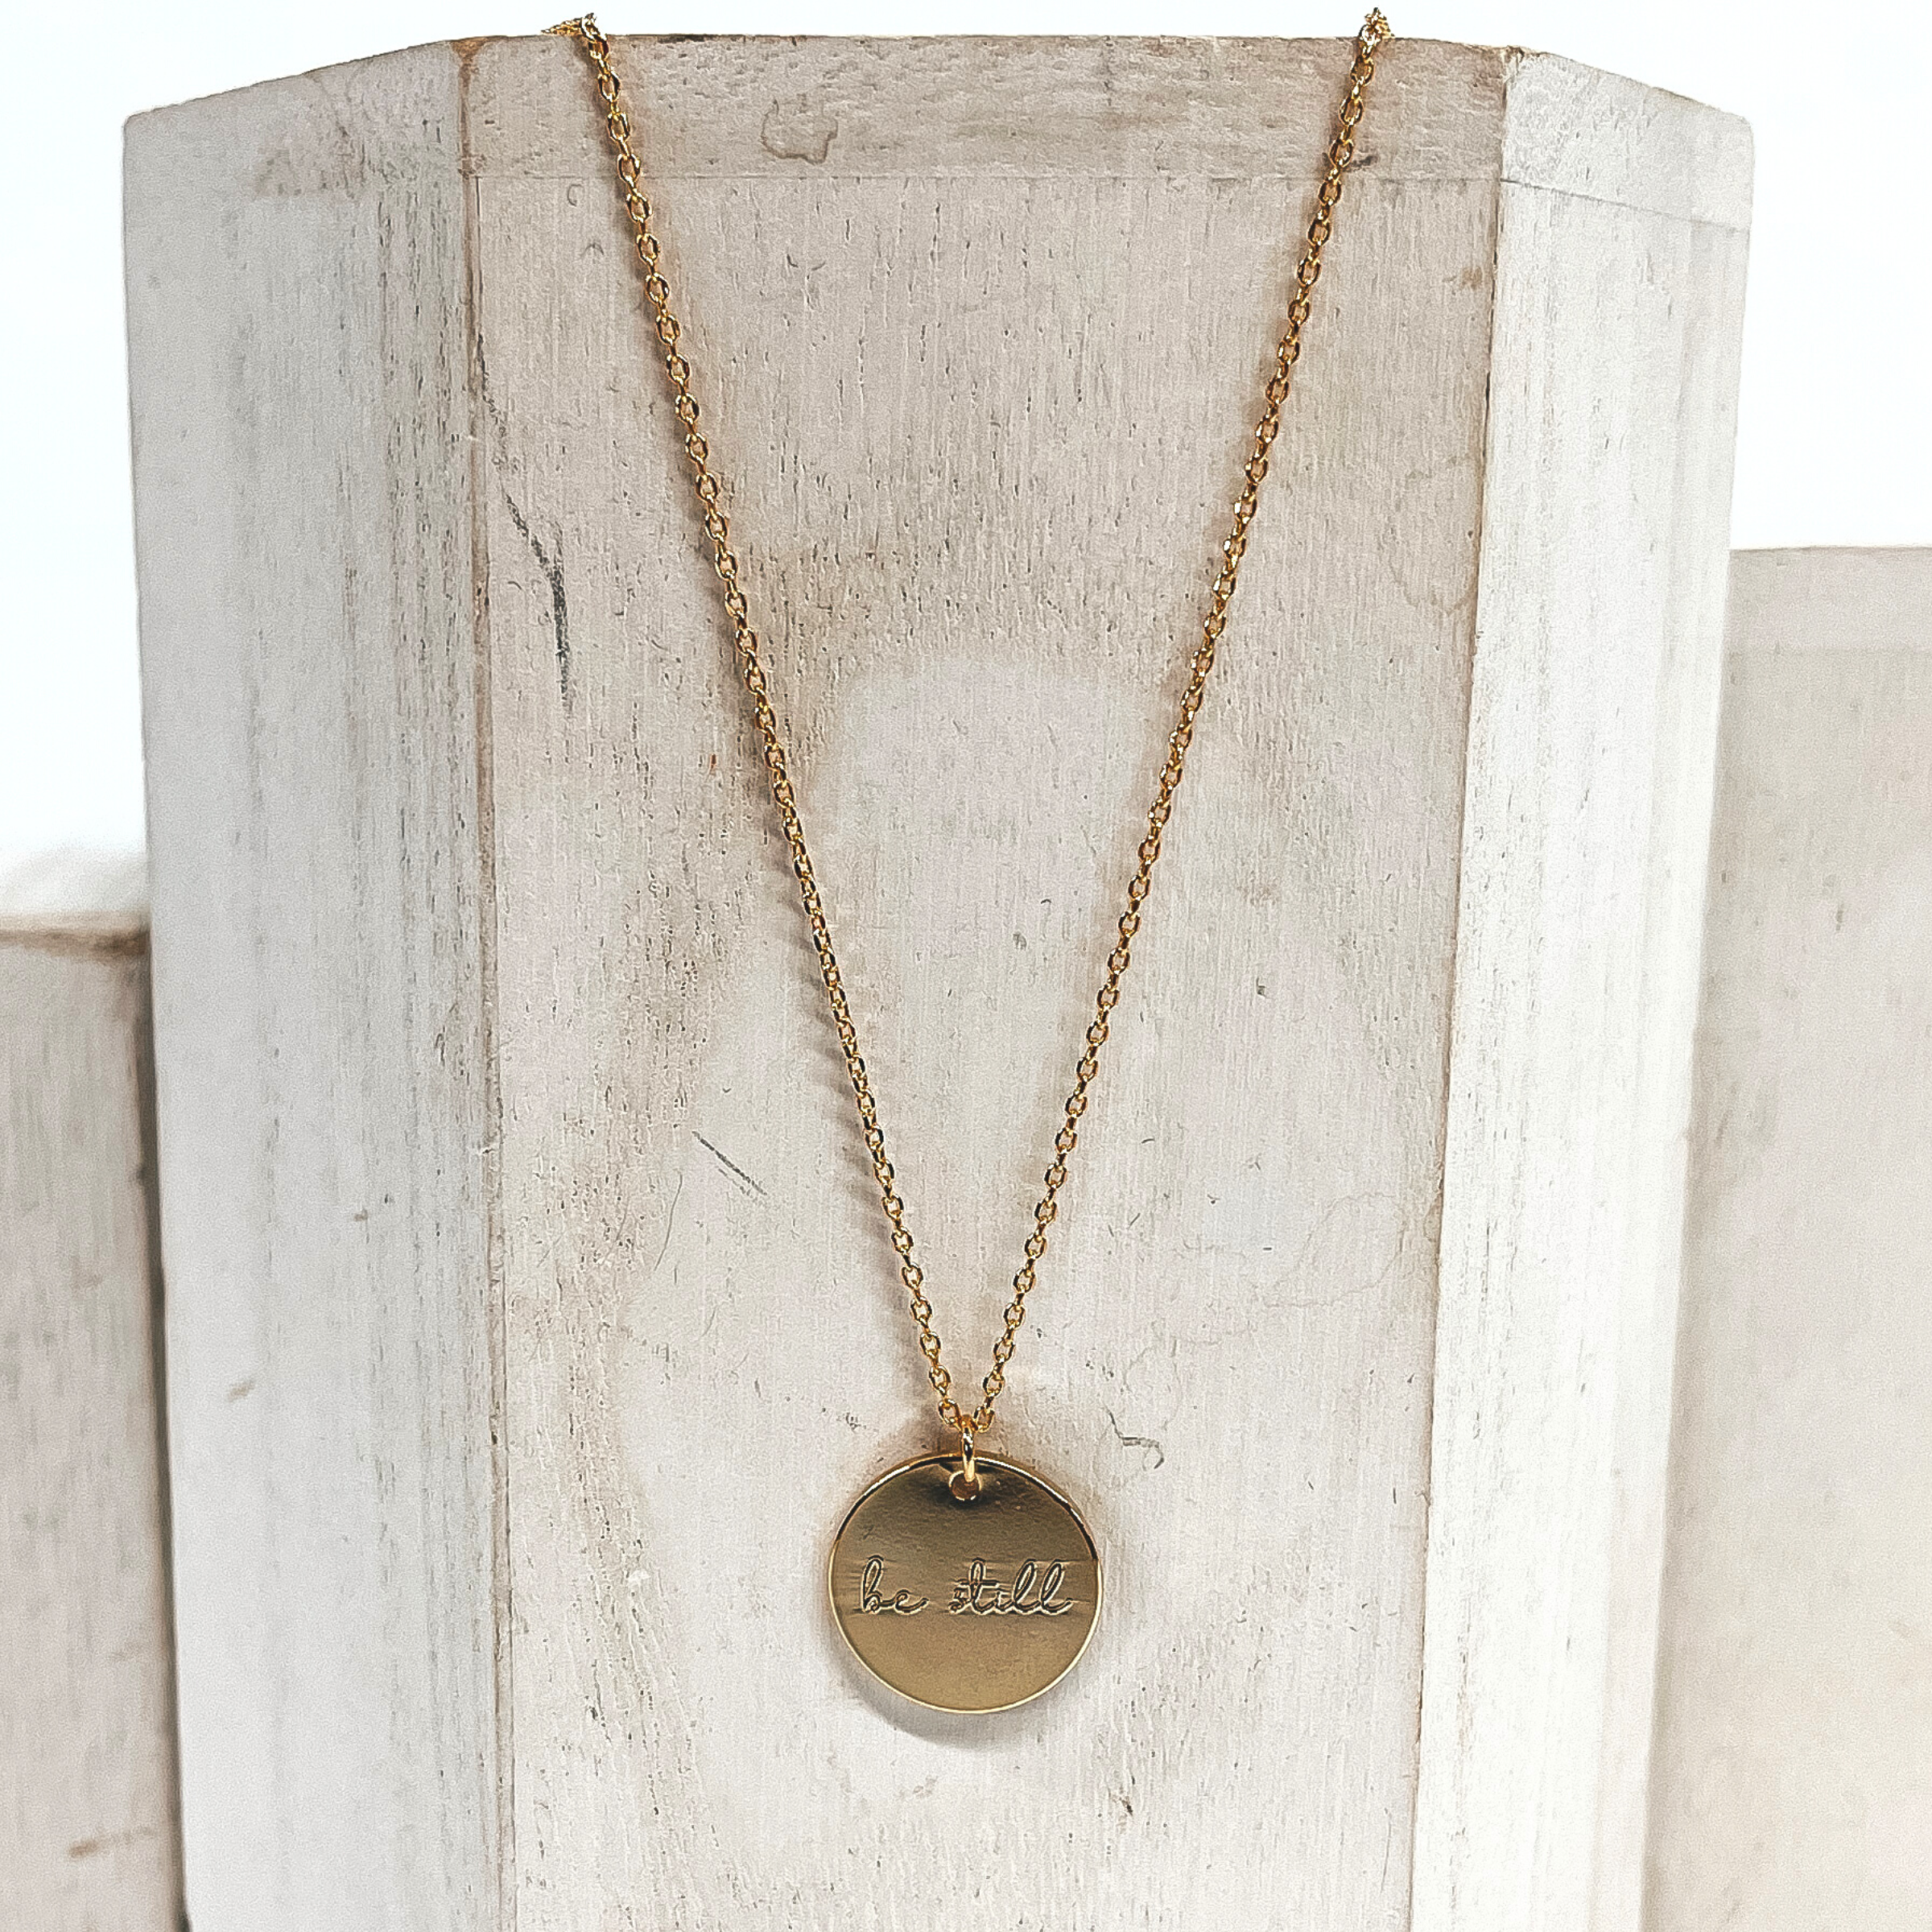 This is a thin gold necklace with a circle pendant that says, Be Still. This necklace is placed on a white/ivory block.